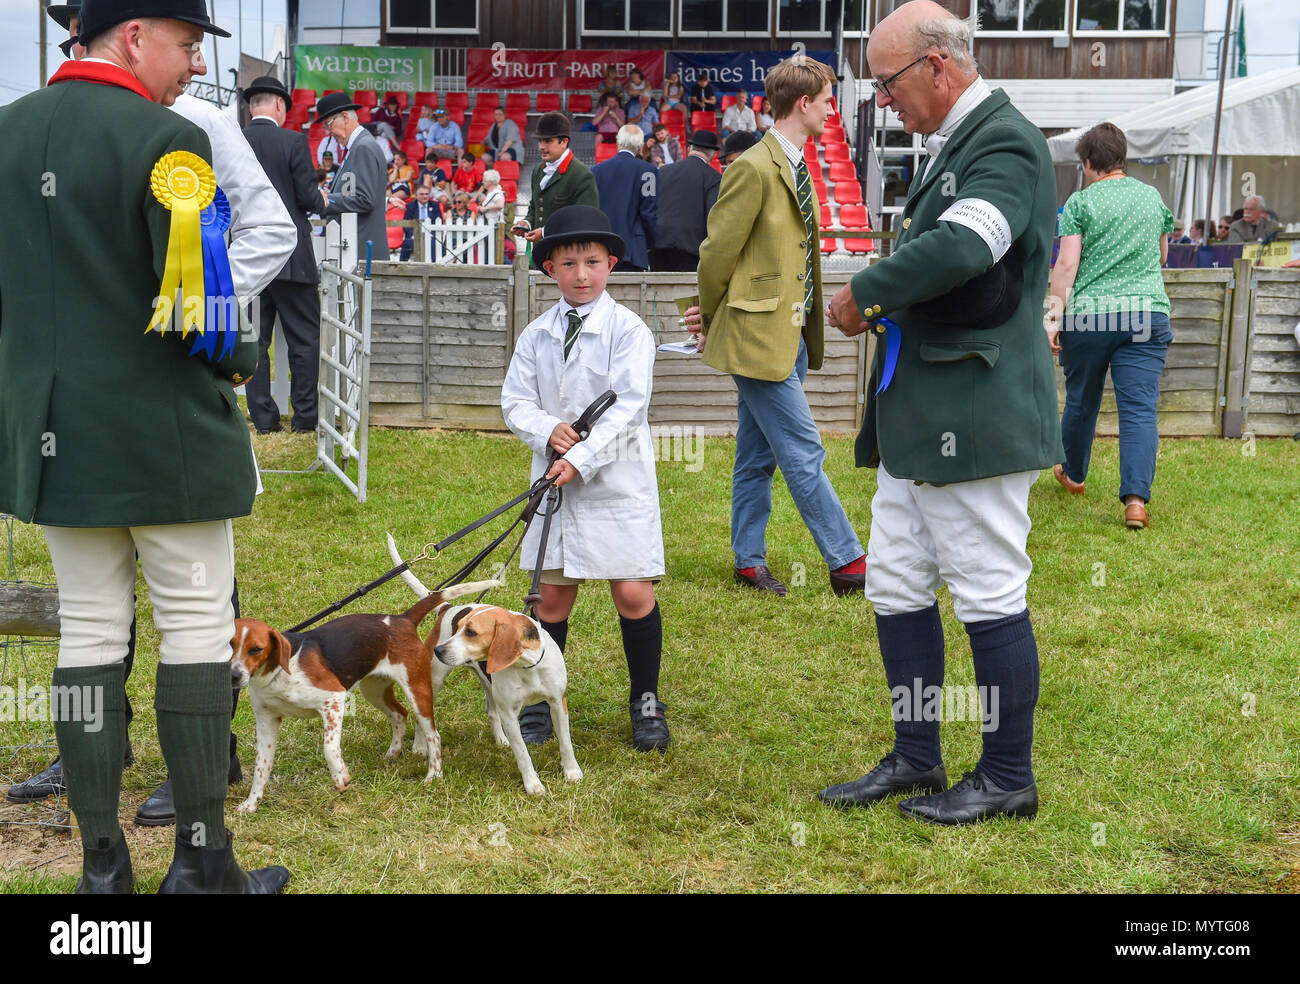 Ardingly Sussex UK 8th June 2018 - 8 year old Jack Higgs from the Trinity Foot & South Herts hounds competing with his father Matthew (right) at the South of England Show in beautiful sunny weather held at the Ardingly Showground near Haywards Heath Sussex Photograph by Simon Dack Credit: Simon Dack/Alamy Live News Stock Photo